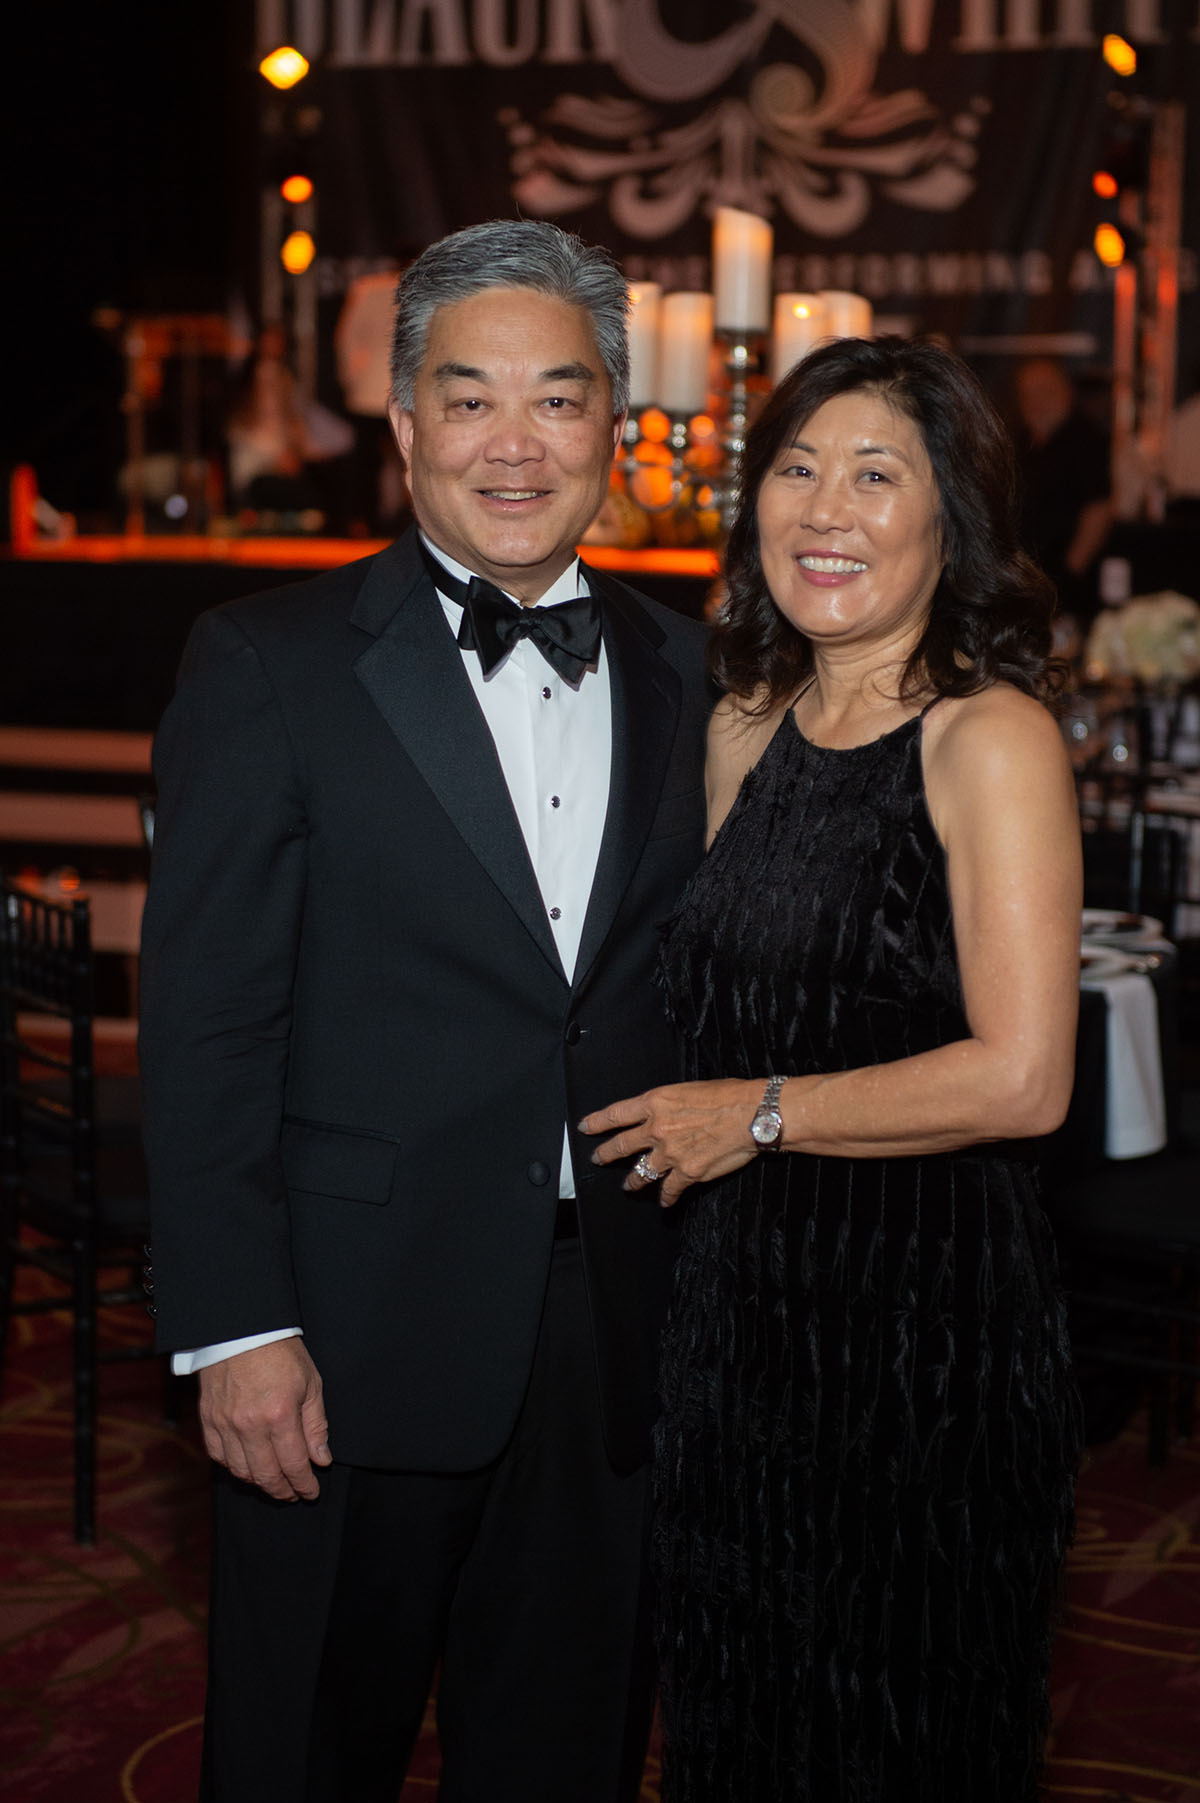 Willie and Linda Chiang